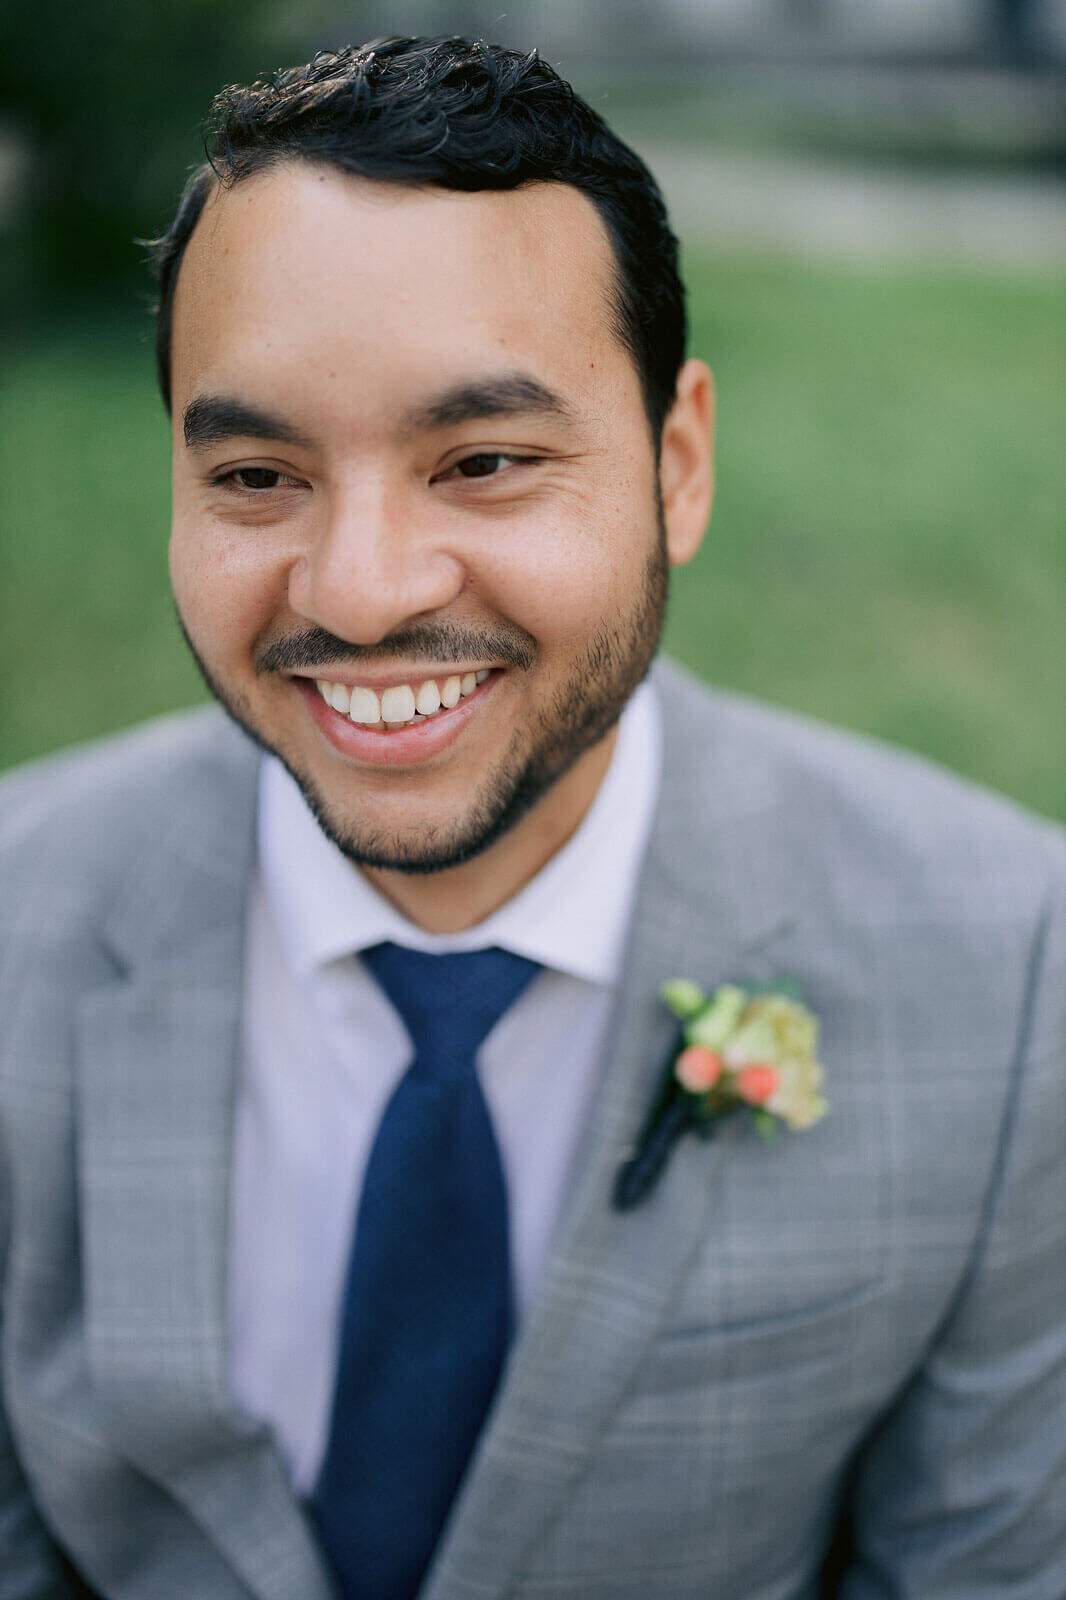 The groom is so happy at a park in New York. Image by Jenny Fu Studio